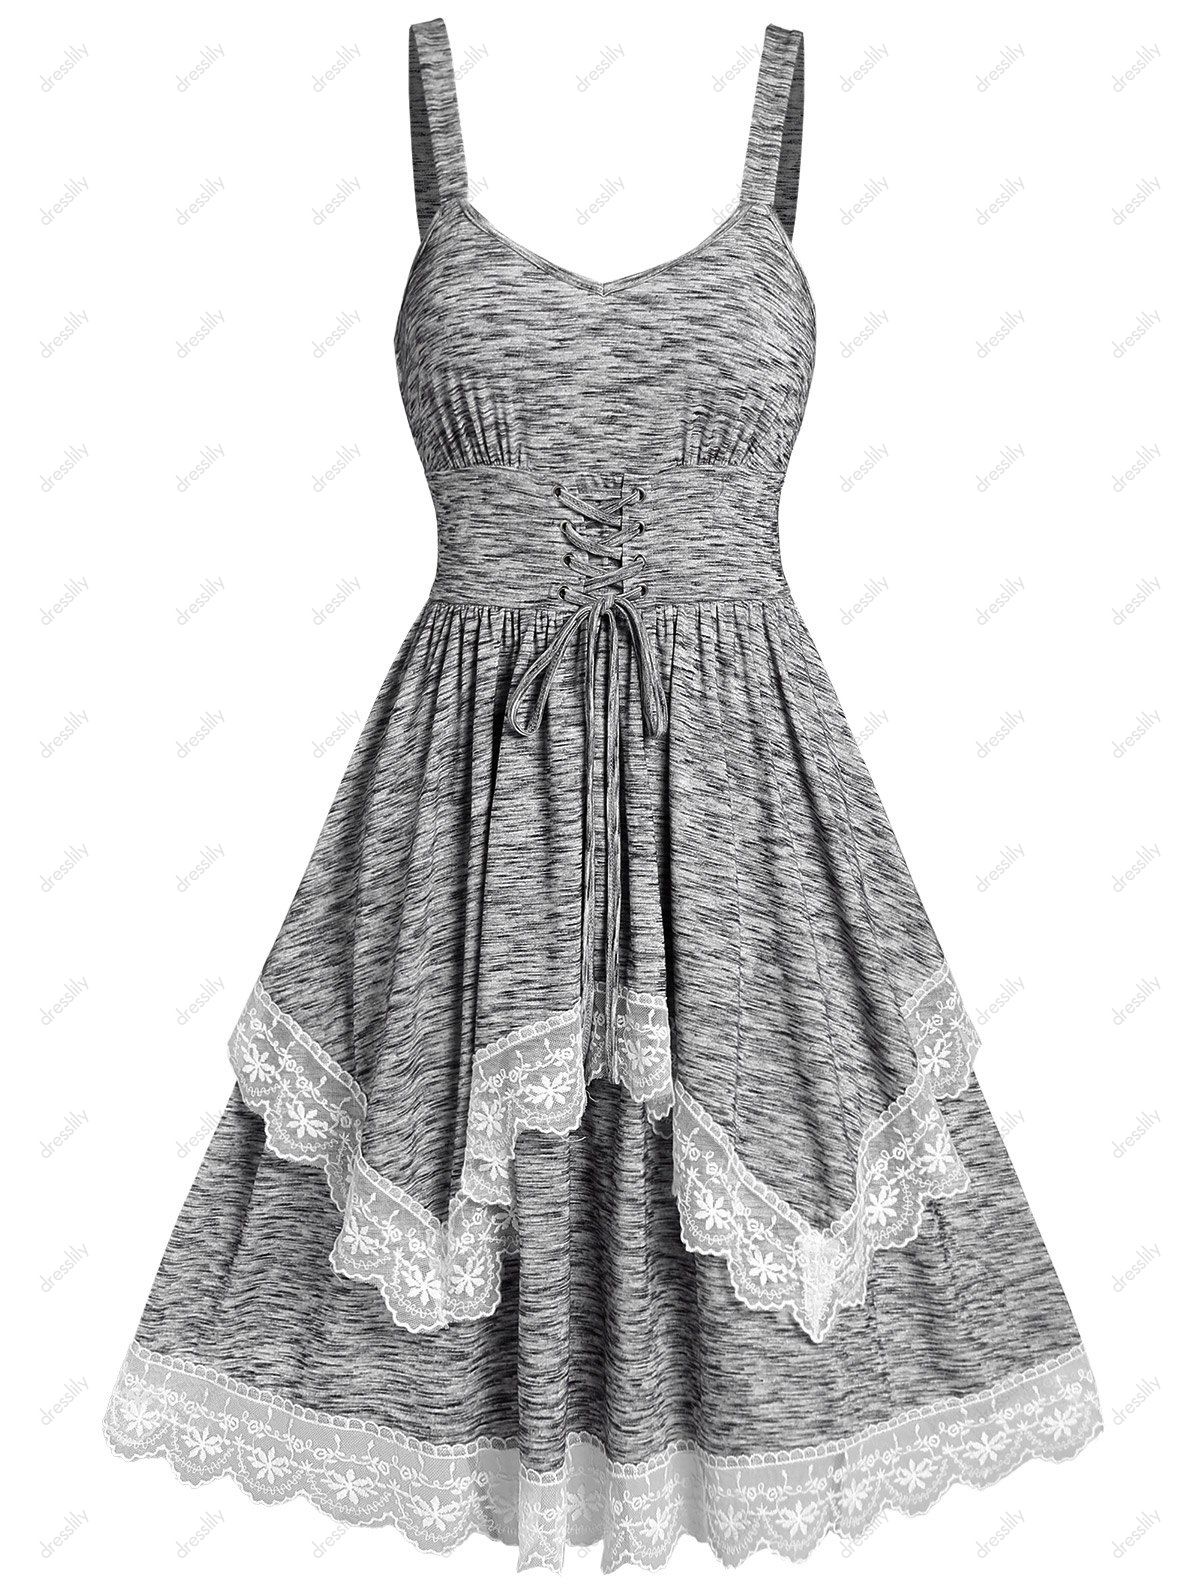 Space Dye Casual Mini Dress Lace Up Floral Lace Panel Sleeveless Layered A Line Summer Dress - LIGHT GRAY M